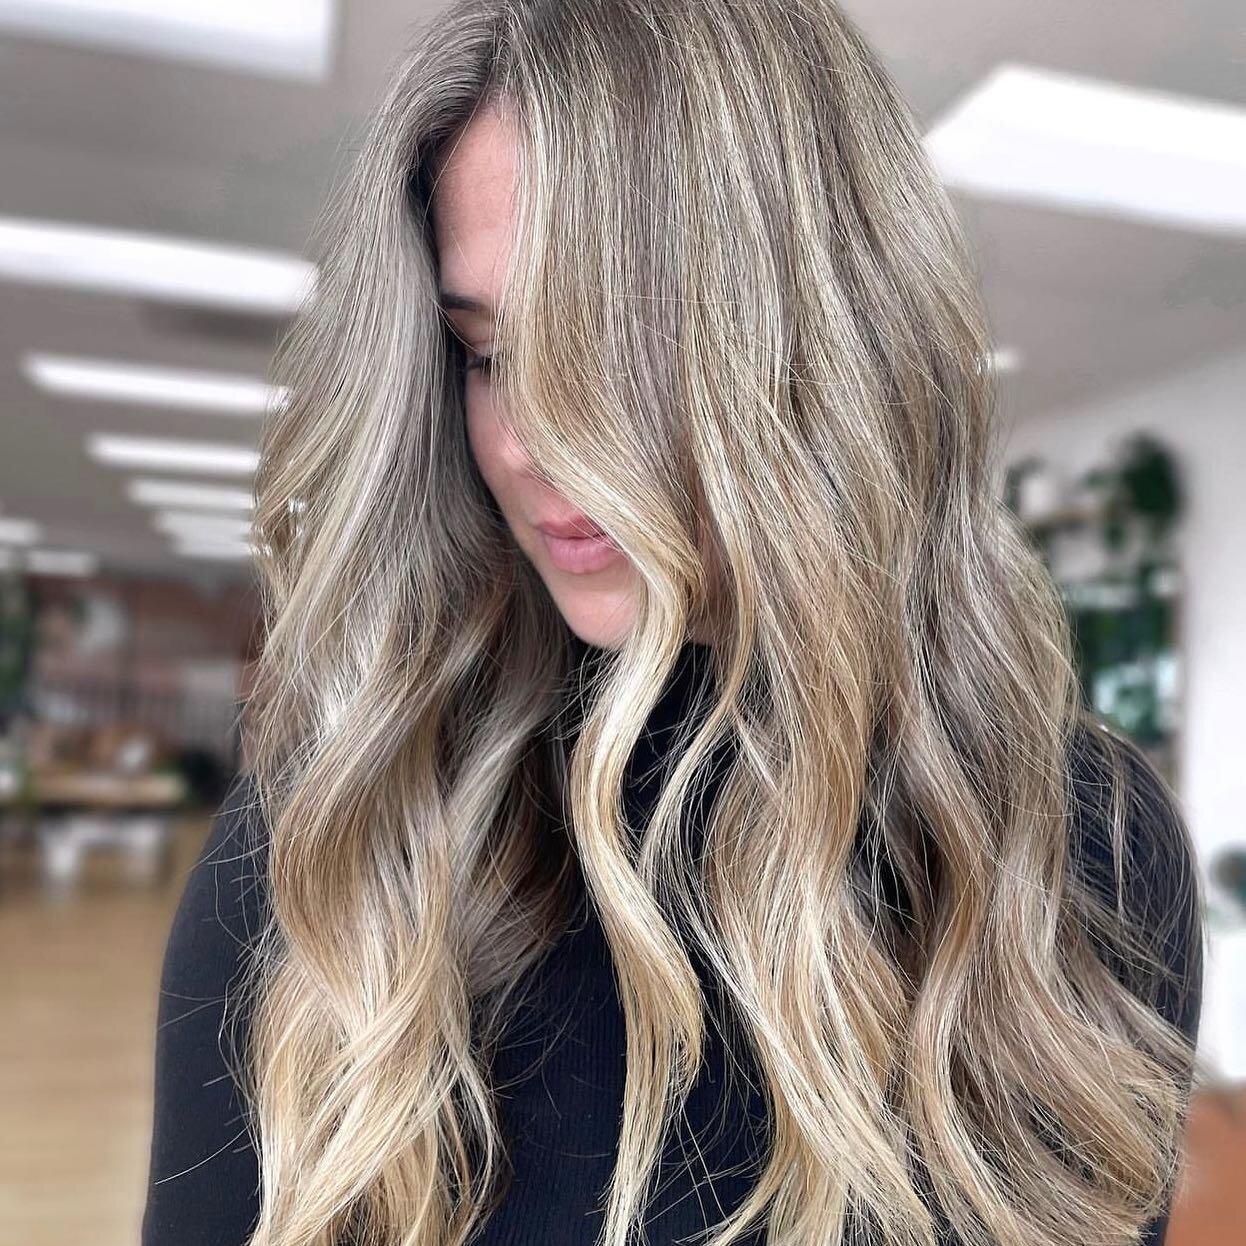 Forever in love with anything @ajshair_ touches! 🔅 Gorgeous in every way!

Hair by Andrea @ajshair_ 

#citizen #citizensalonoceanside #citizensalonsd #oceansidehair #oceansidehairstylist #oceansidehairsalon